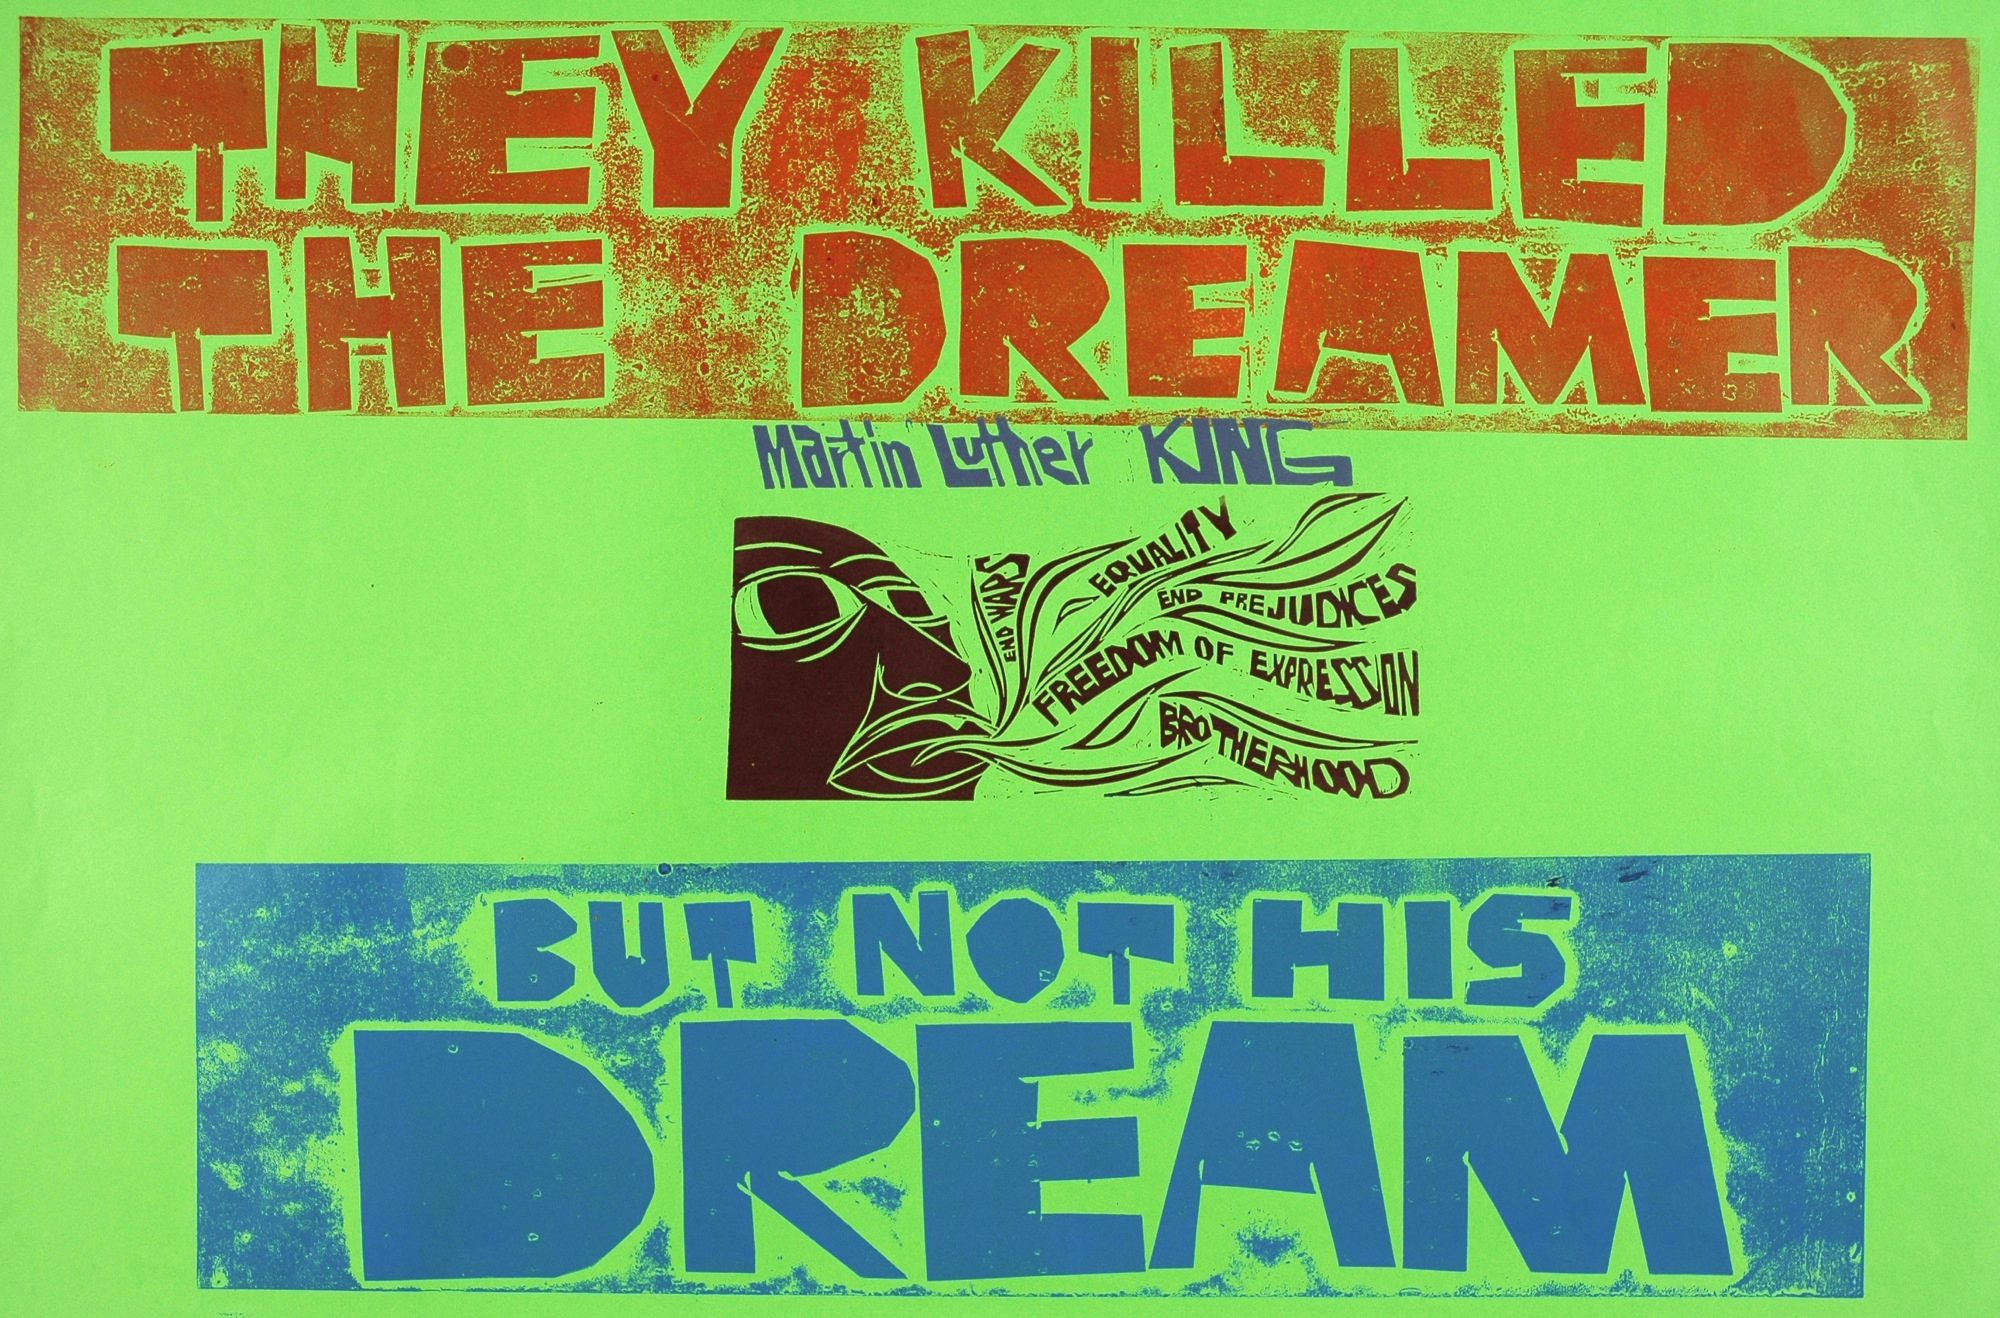 Paul Peter Piech-They killed the dreamer but not his dream-1979-CRsite